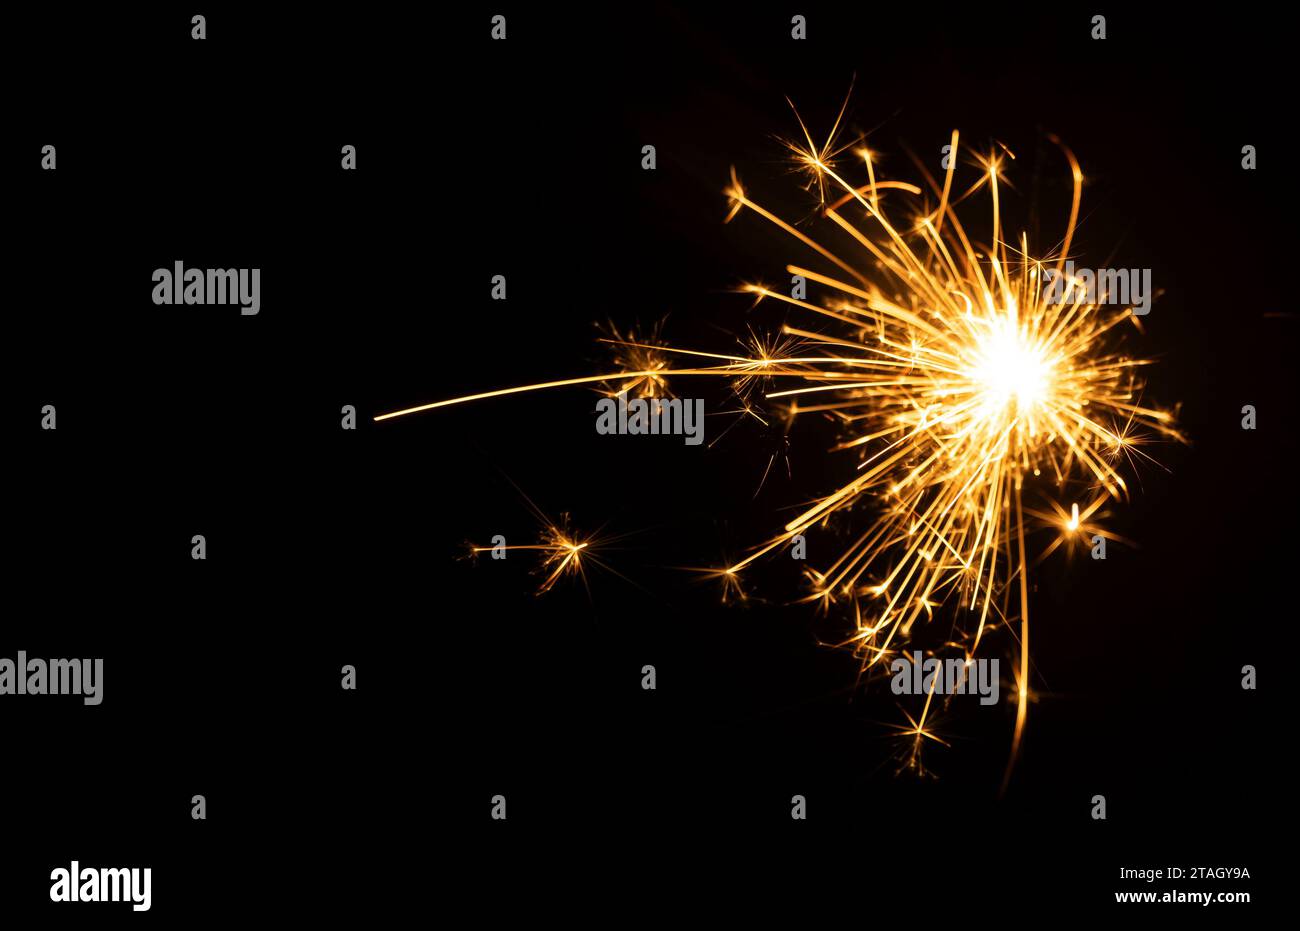 Close-up of sparks from fireworks, decorative lights, and decoration materials for celebrations. Stock Photo